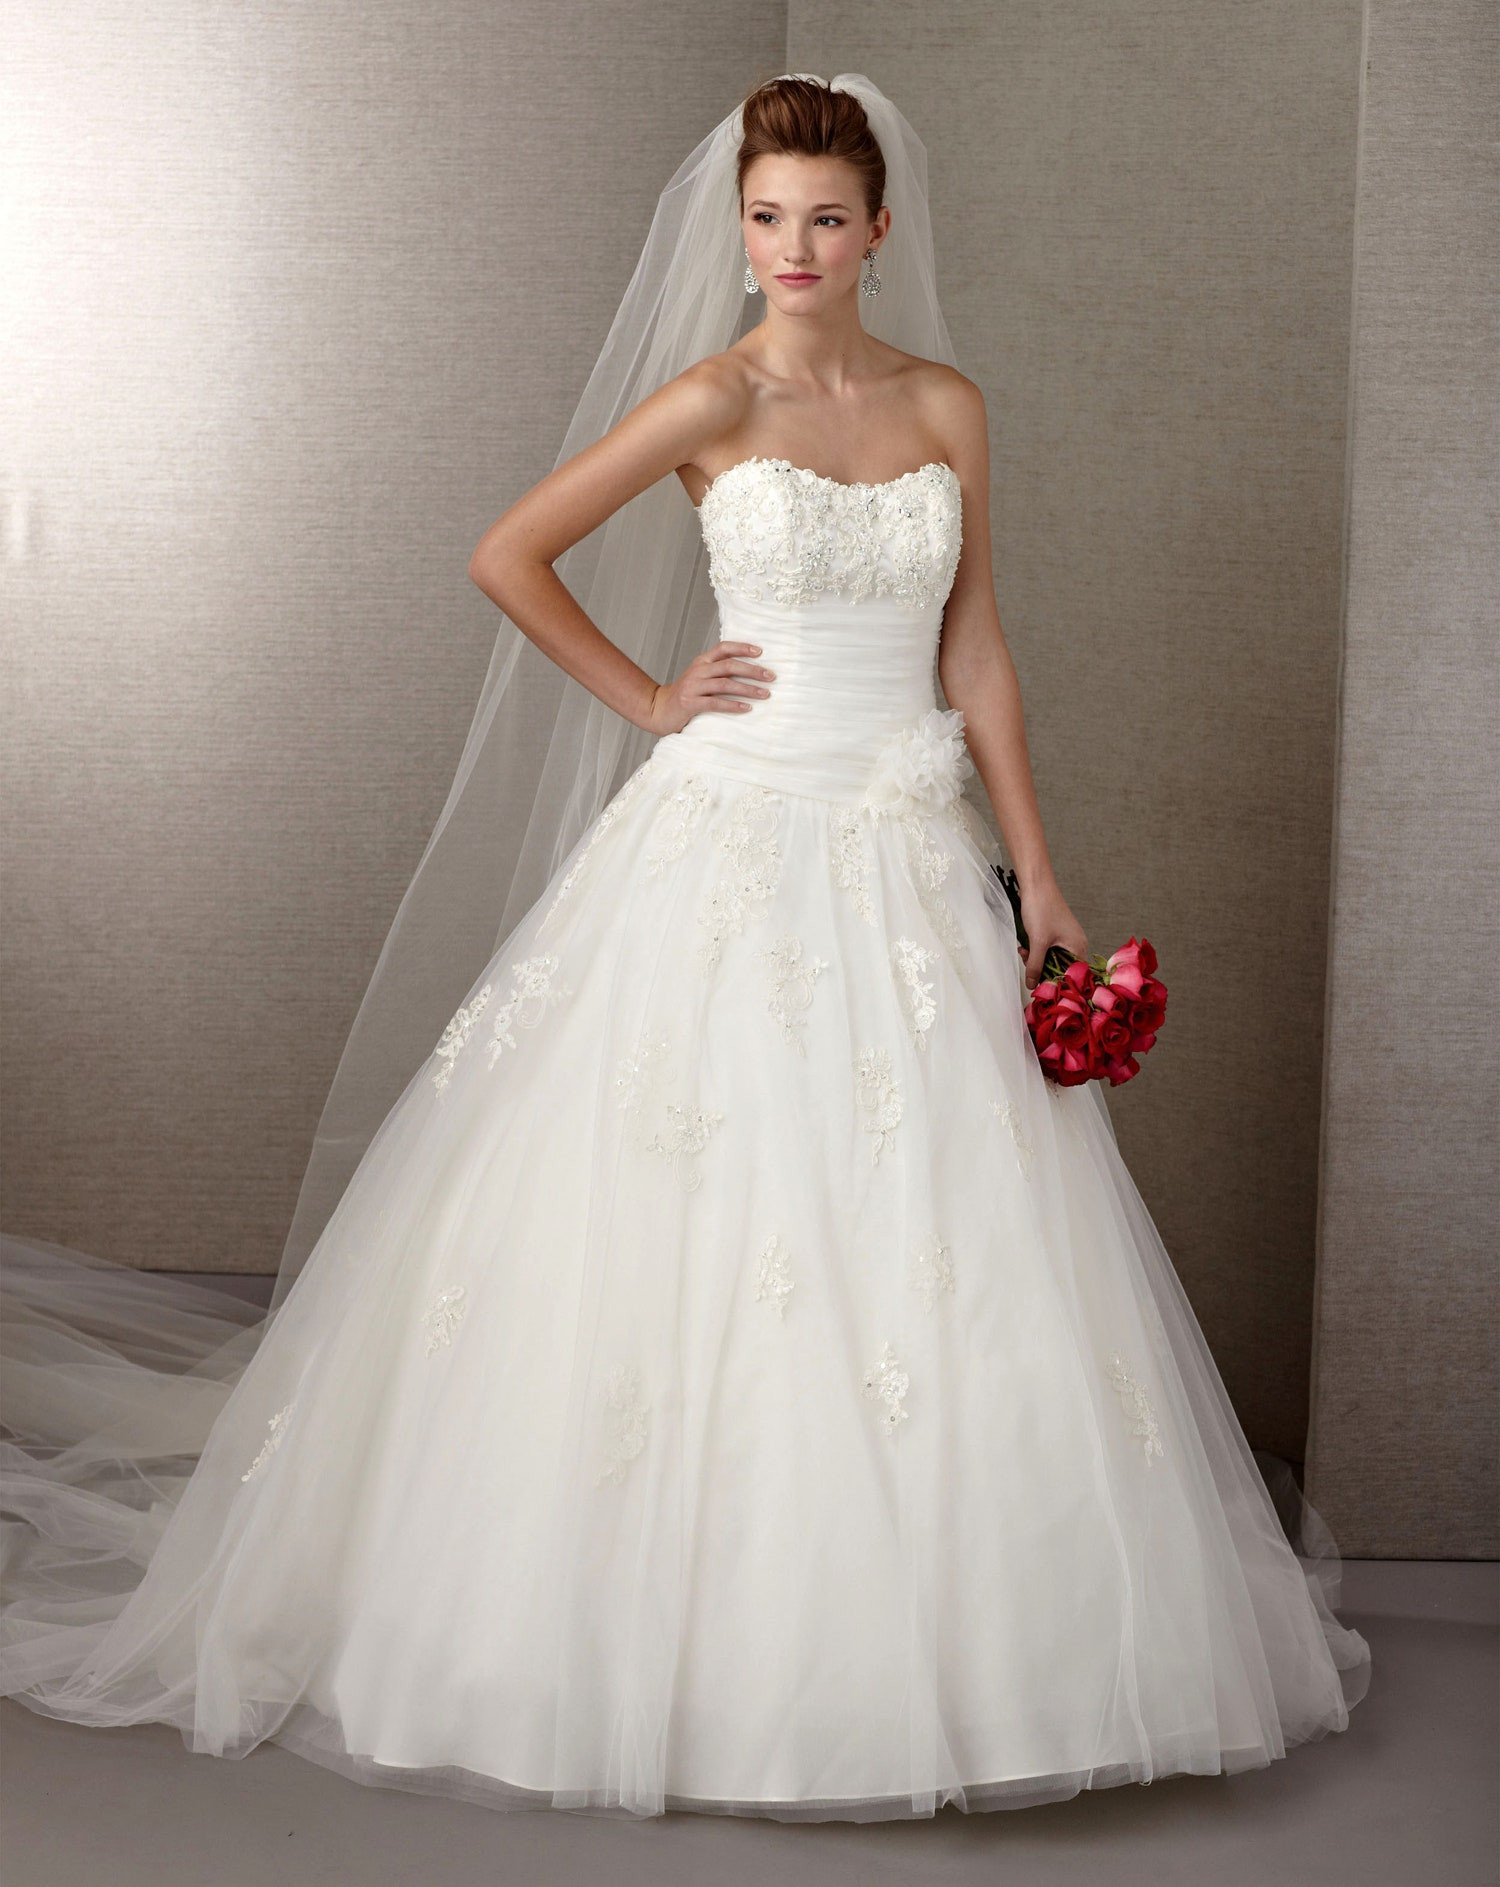 Wedding Gowns Under $100
 21 Gorgeous Wedding Dresses From $100 to $1 000